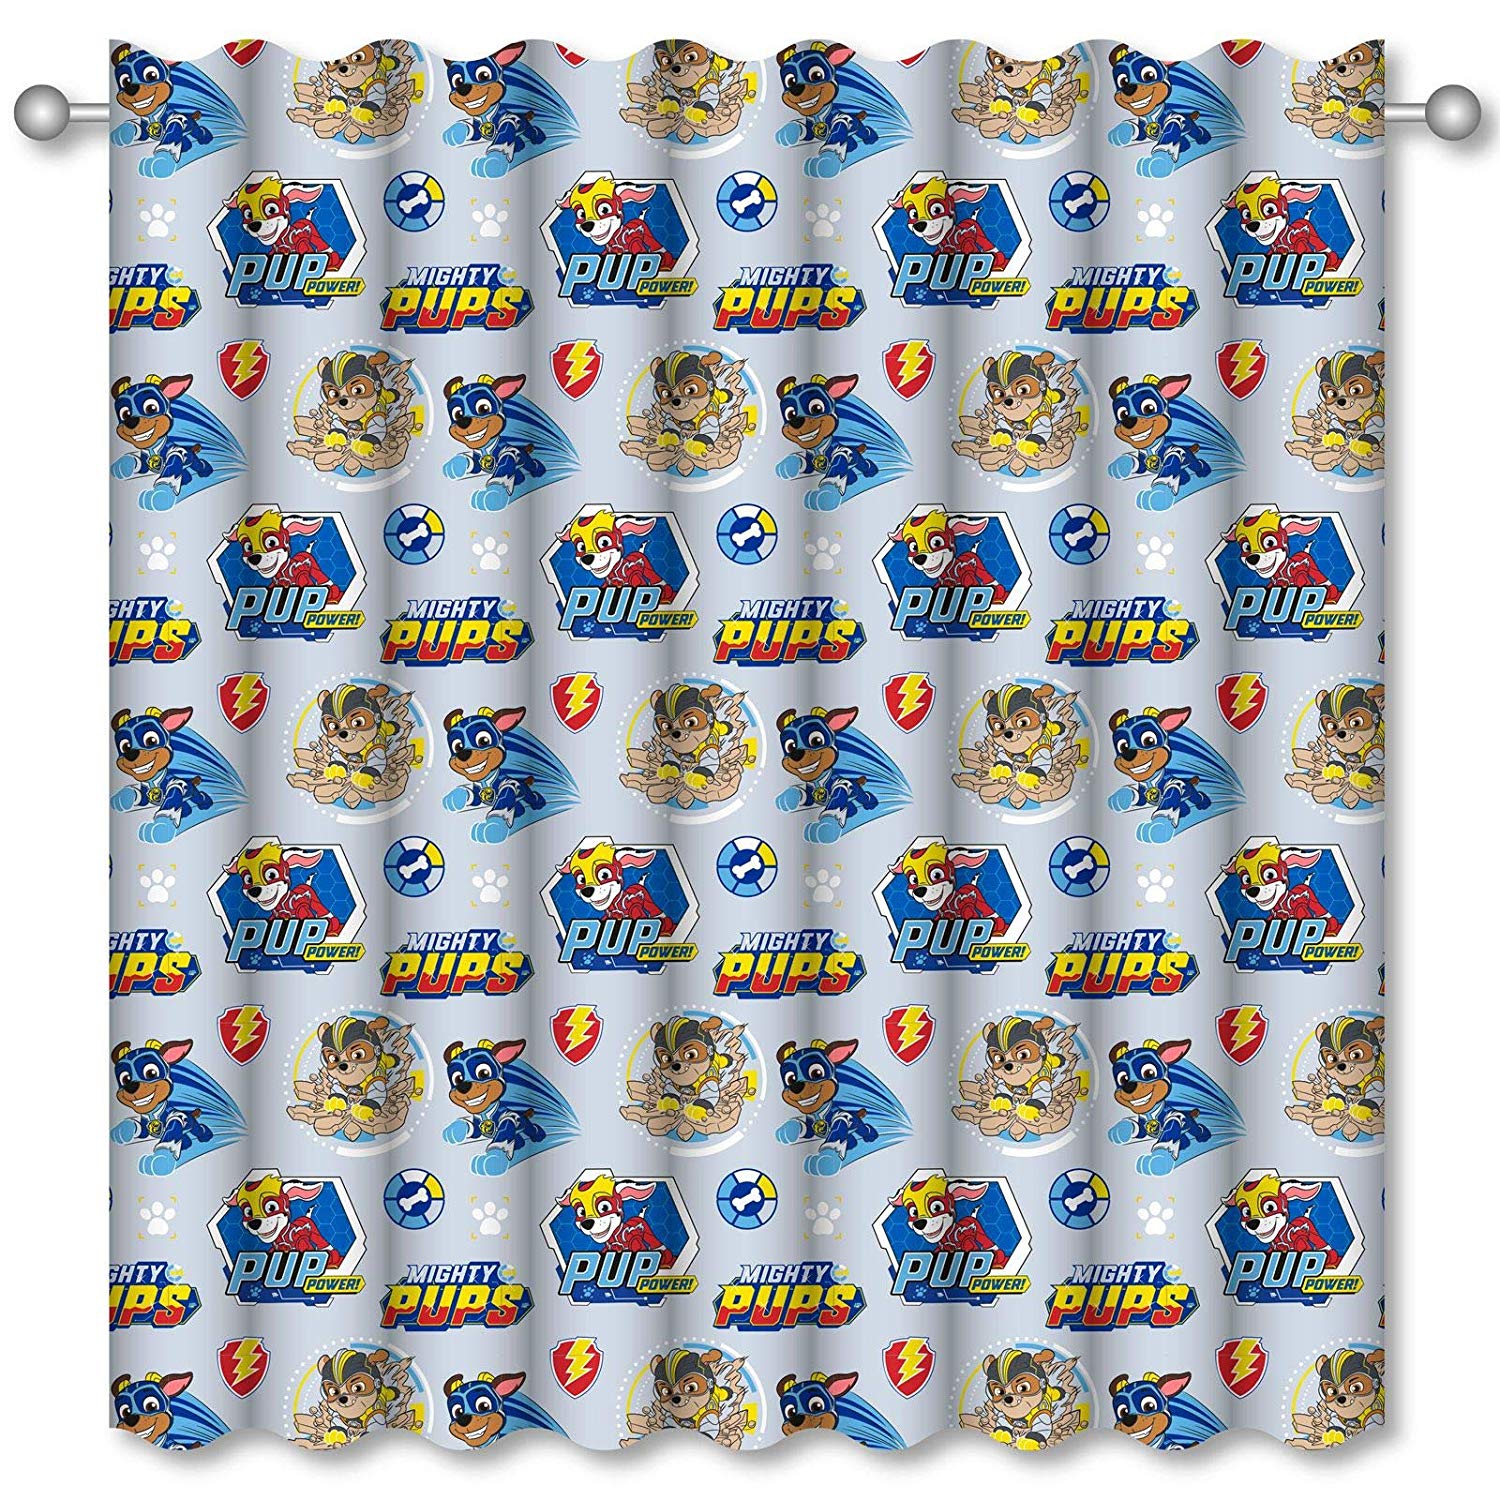 Official Paw Patrol Super Mighty Pups 66 X 54 inch Drop Curtain Pair